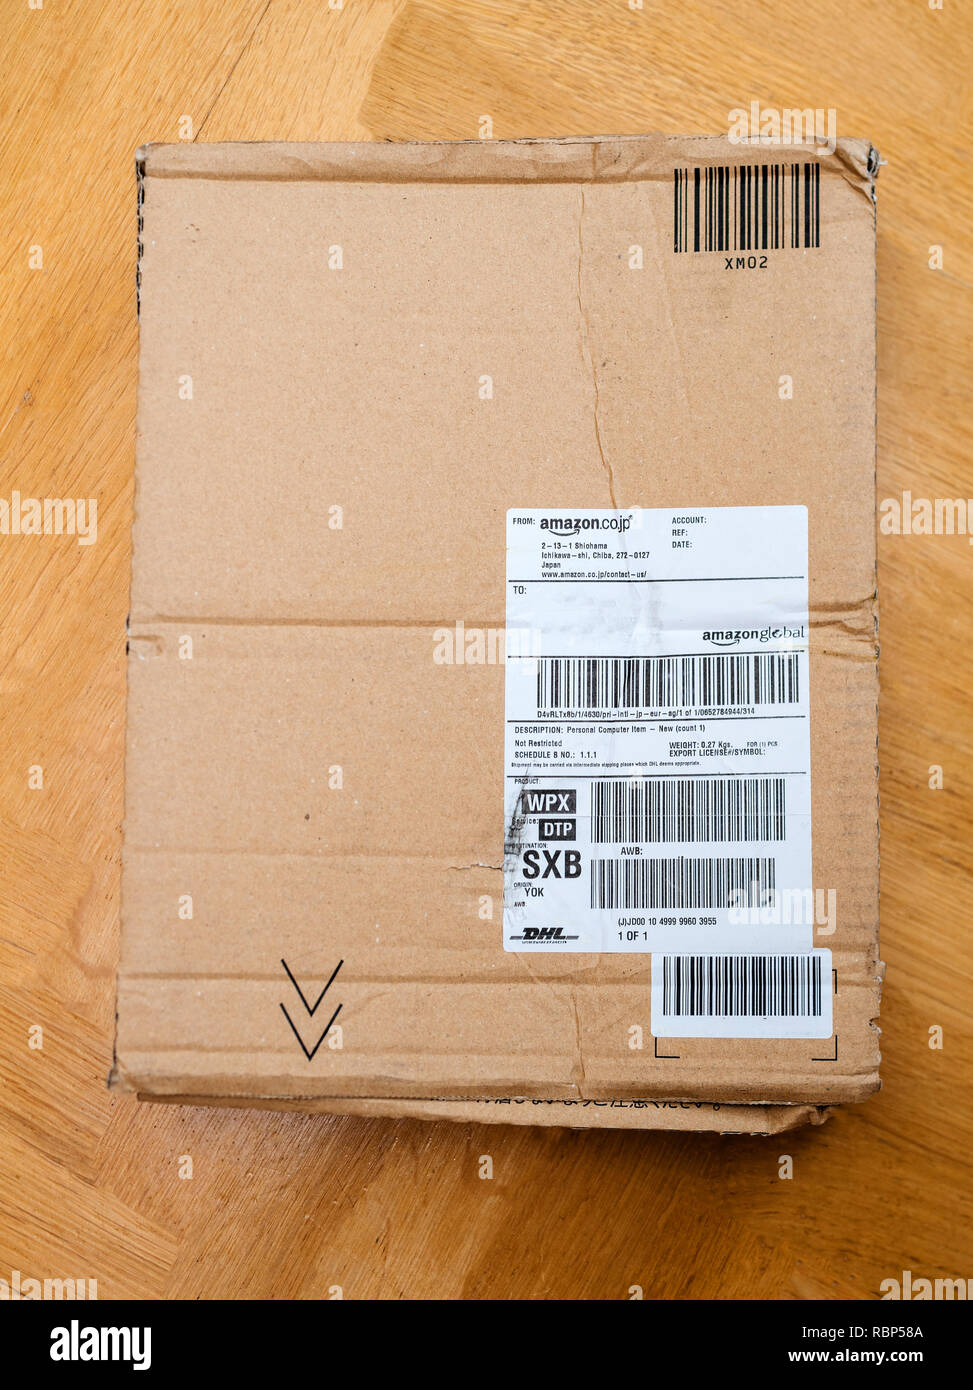 Amazon co jp box hi-res stock photography and images - Alamy